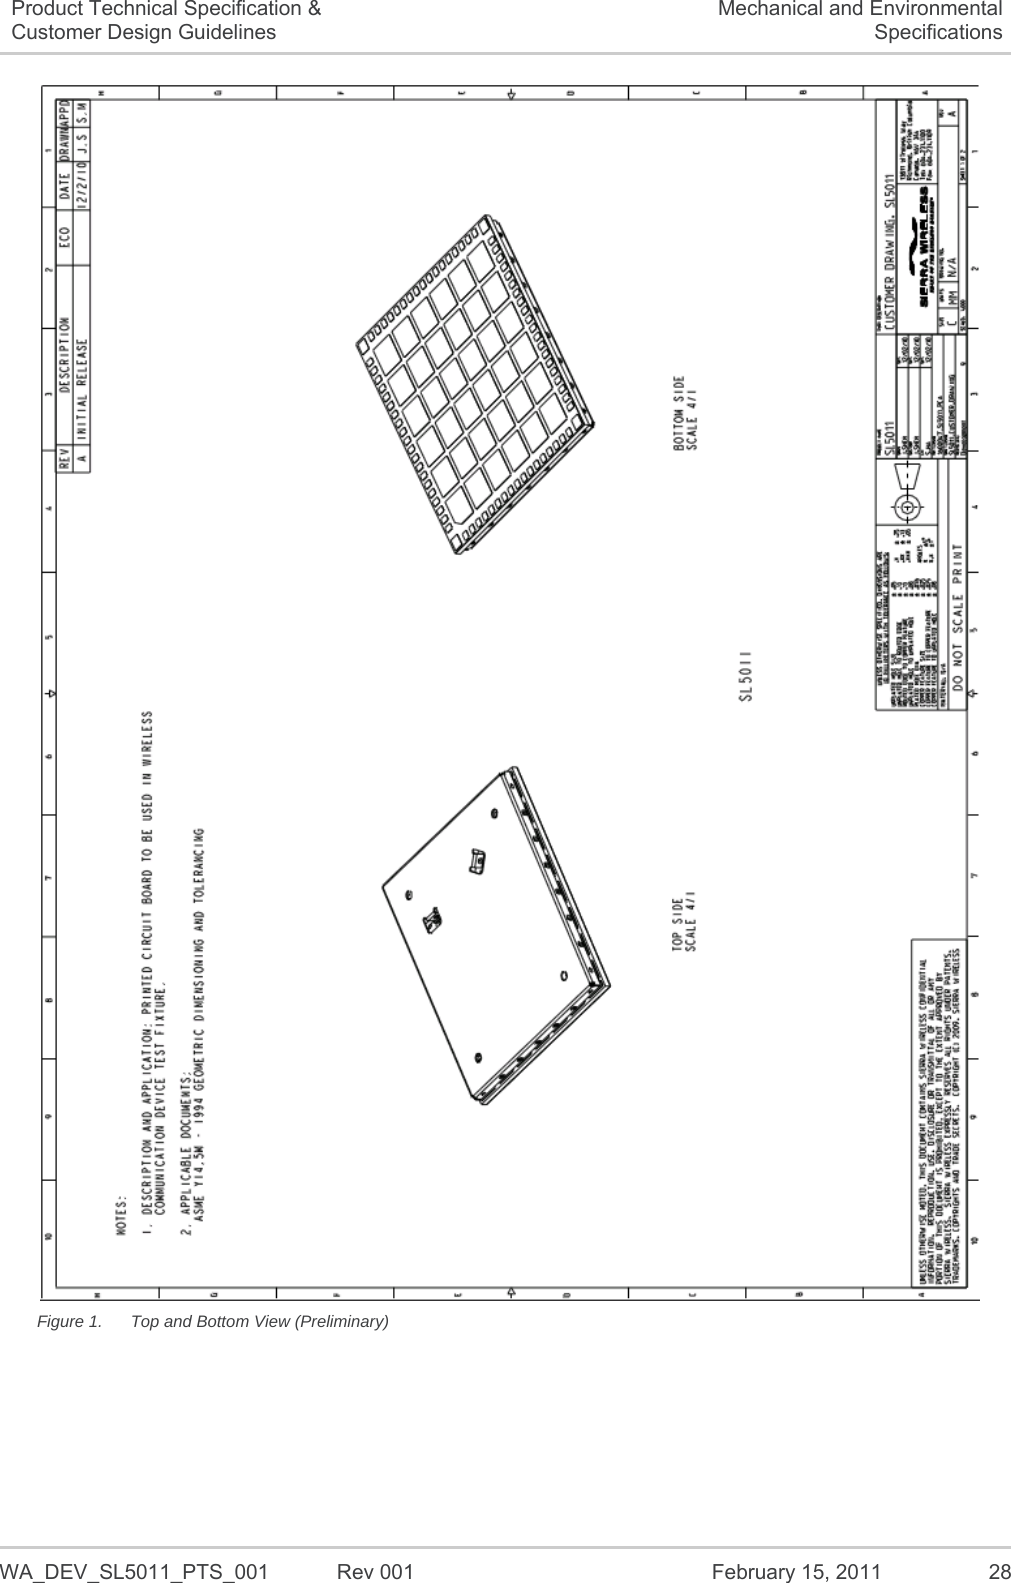   WA_DEV_SL5011_PTS_001  Rev 001  February 15, 2011  28 Product Technical Specification &amp; Customer Design Guidelines Mechanical and Environmental Specifications  Figure 1.  Top and Bottom View (Preliminary) 